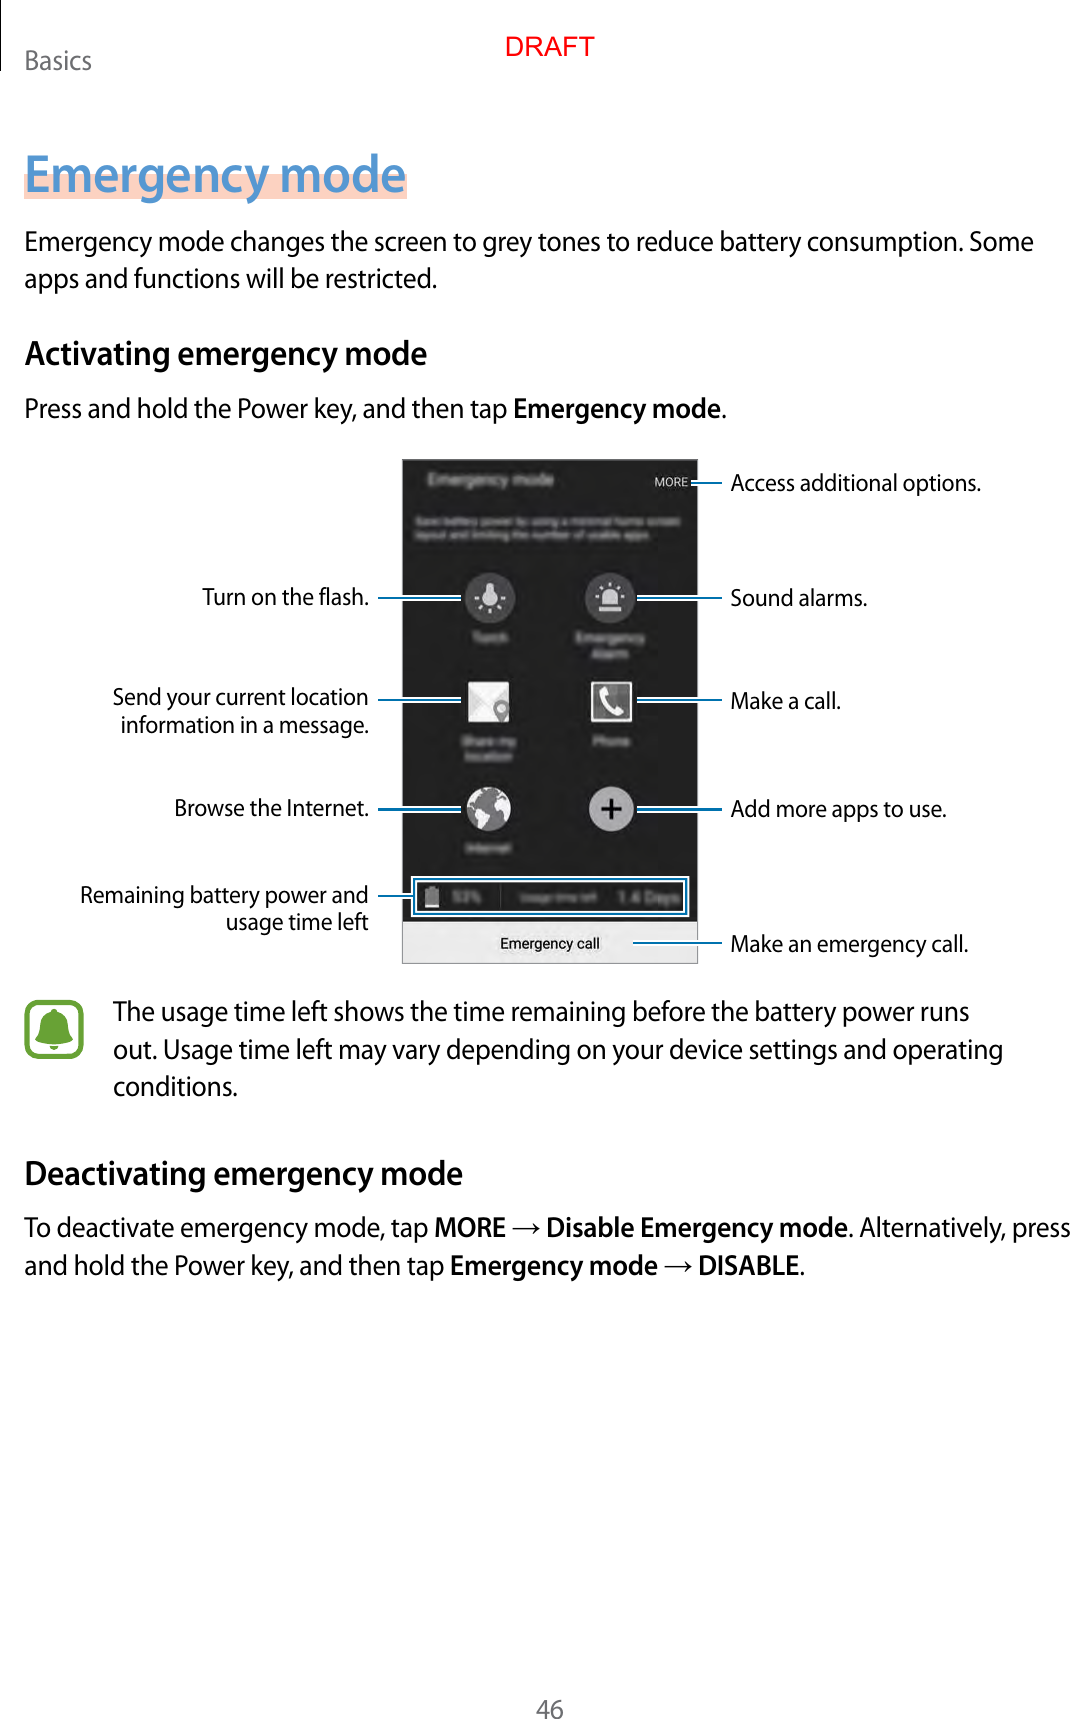 Basics46Emergency modeEmergency mode changes the screen to grey tones to reduce battery consumption. Some apps and functions will be restricted.Activating emergency modePress and hold the Power key, and then tap Emergency mode.Add more apps to use.Make an emergency call.Remaining battery power and usage time leftTurn on the flash.Make a call.Send your current location information in a message.Browse the Internet.Access additional options.Sound alarms.The usage time left shows the time remaining before the battery power runs out. Usage time left may vary depending on your device settings and operating conditions.Deactivating emergency modeTo deactivate emergency mode, tap MORE → Disable Emergency mode. Alternatively, press and hold the Power key, and then tap Emergency mode → DISABLE.DRAFT